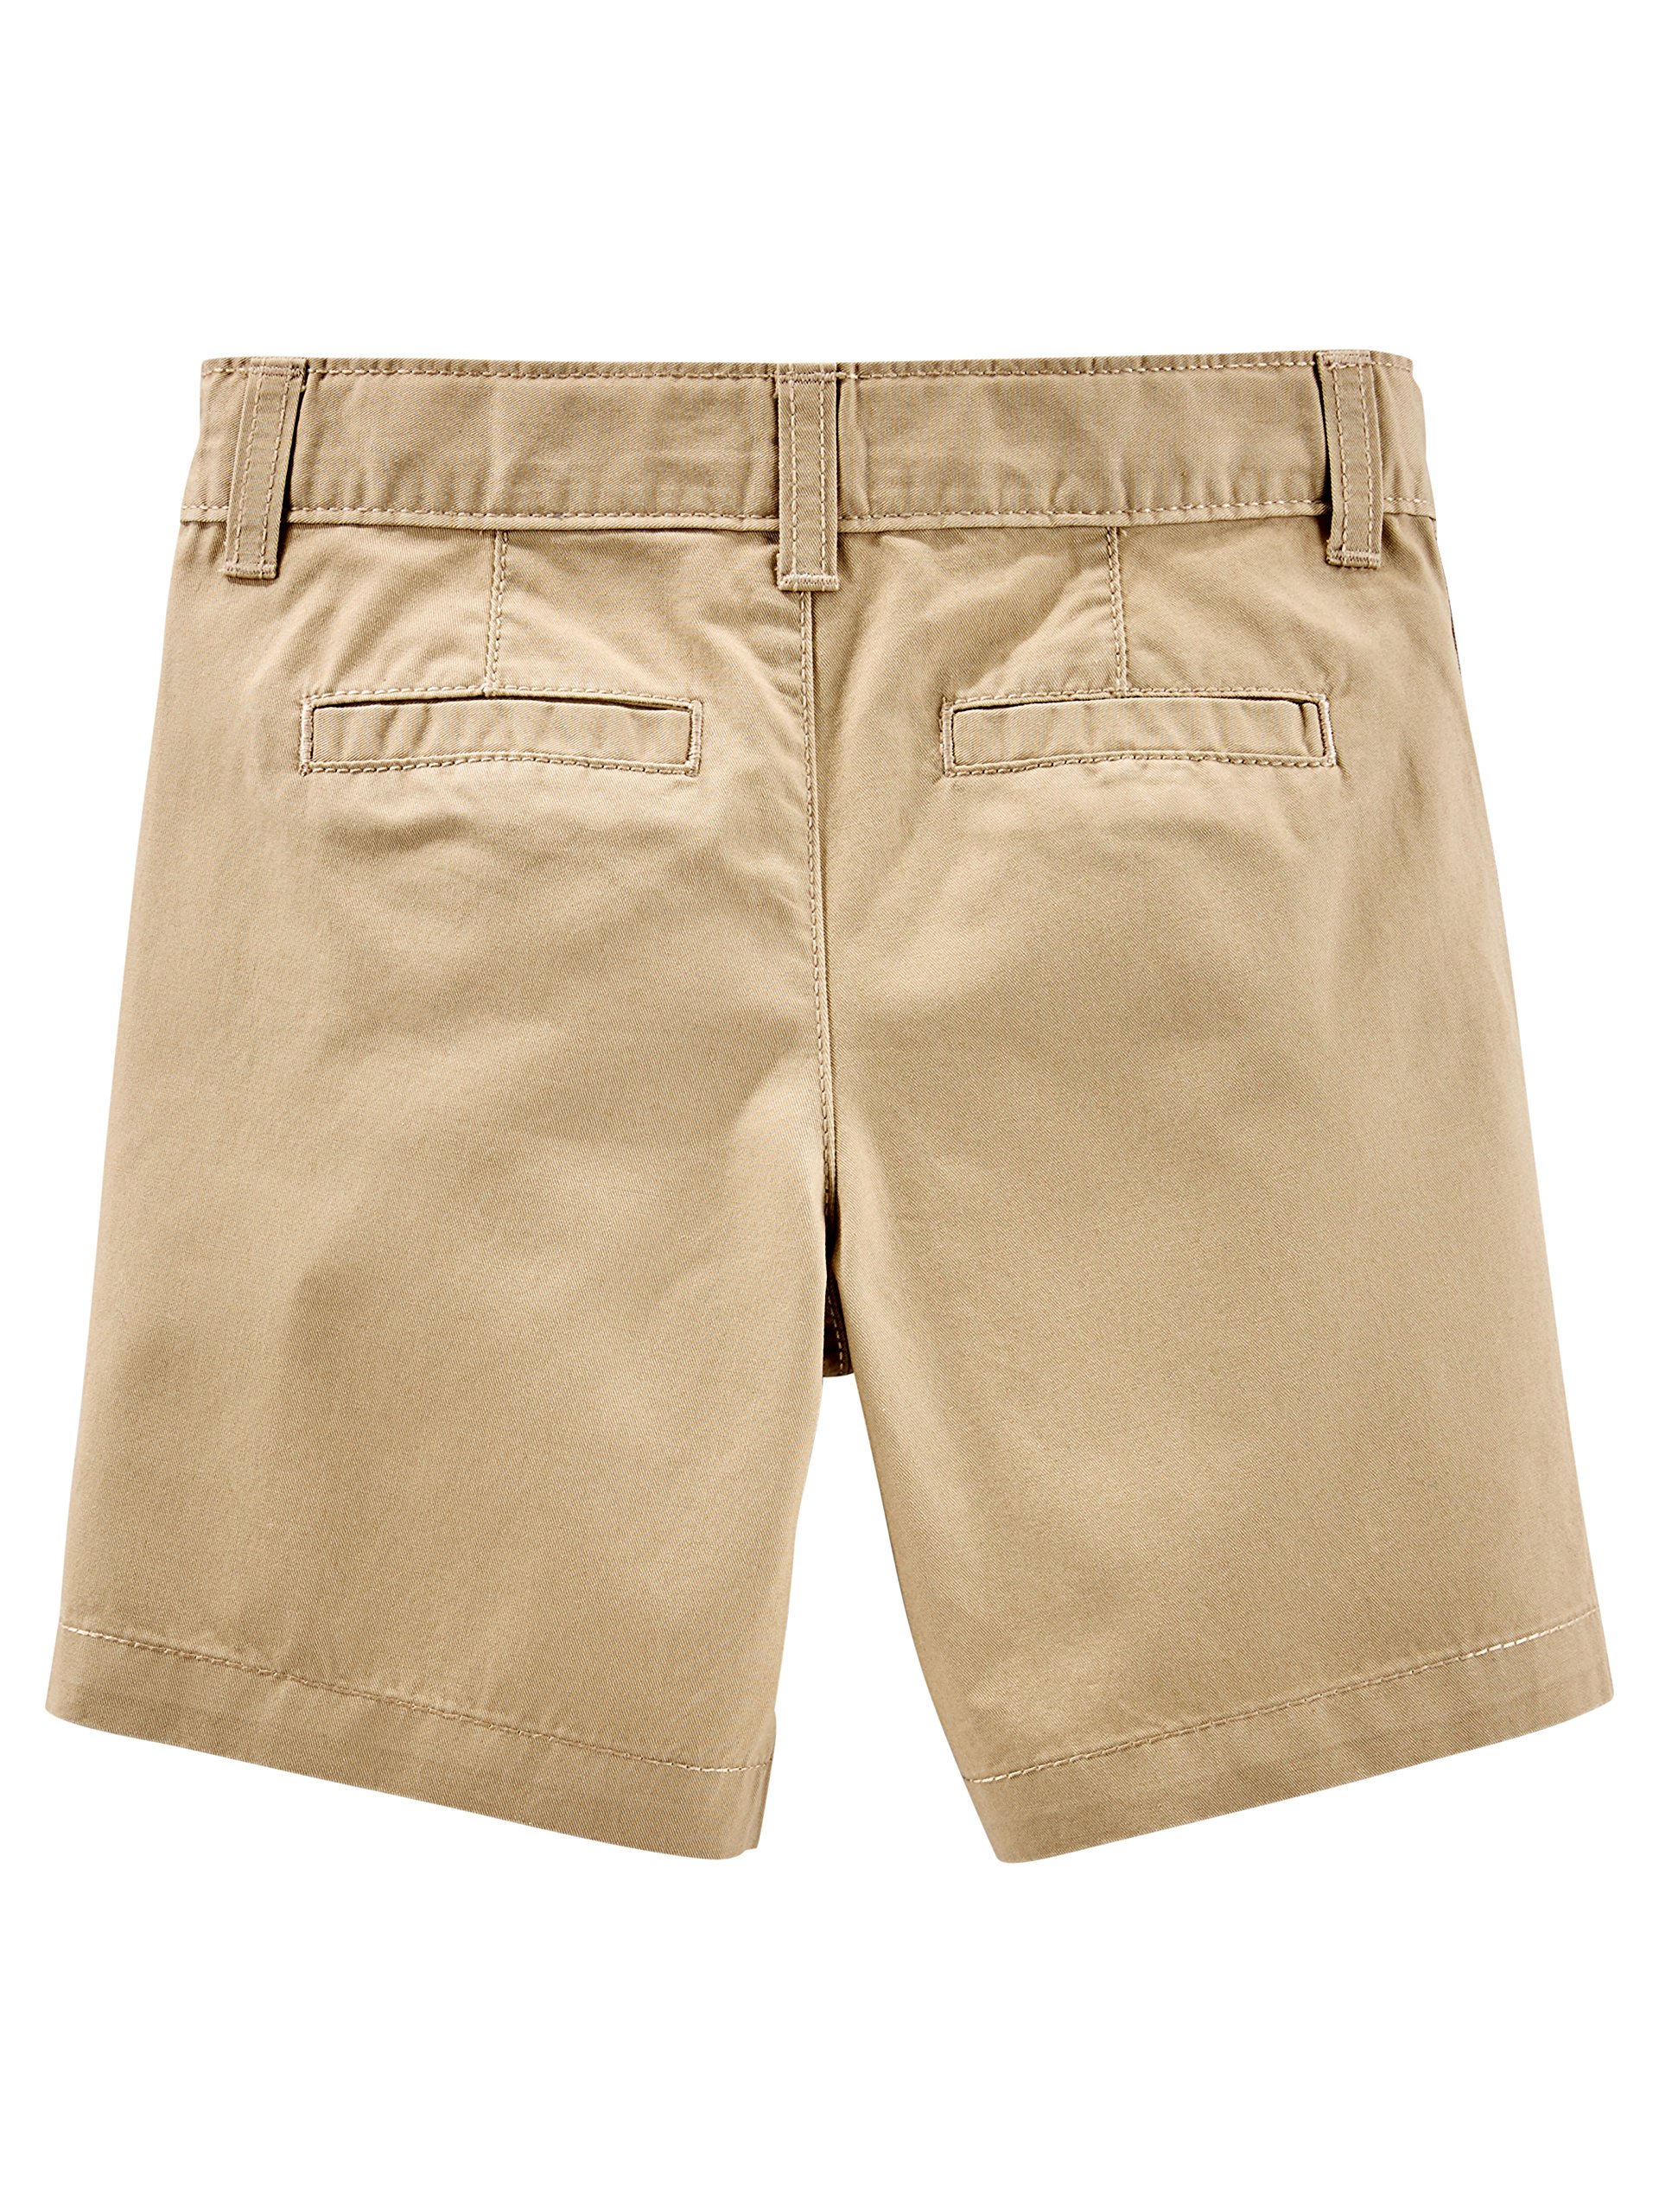 Simple Joys by Carter's Toddler Boys' Flat Front Shorts, Pack of 2